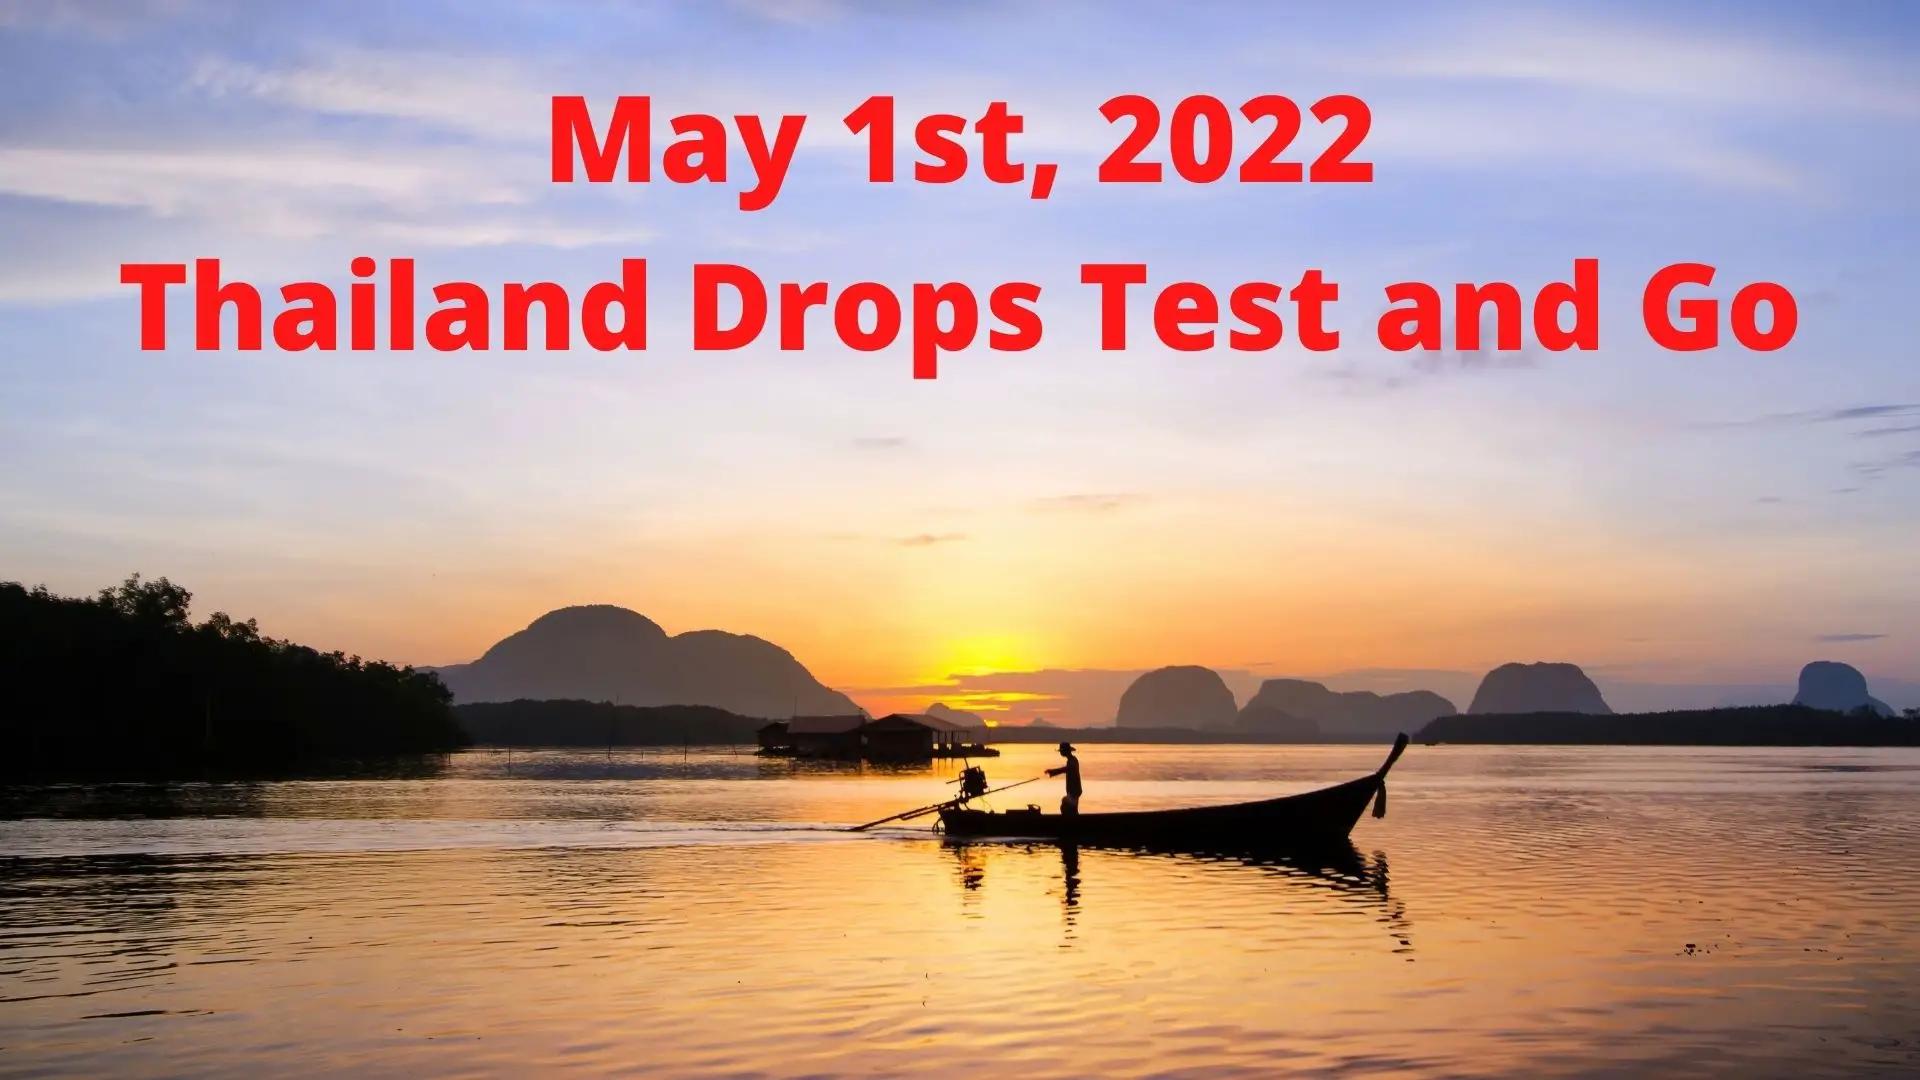 Thailand Drops Test and Go